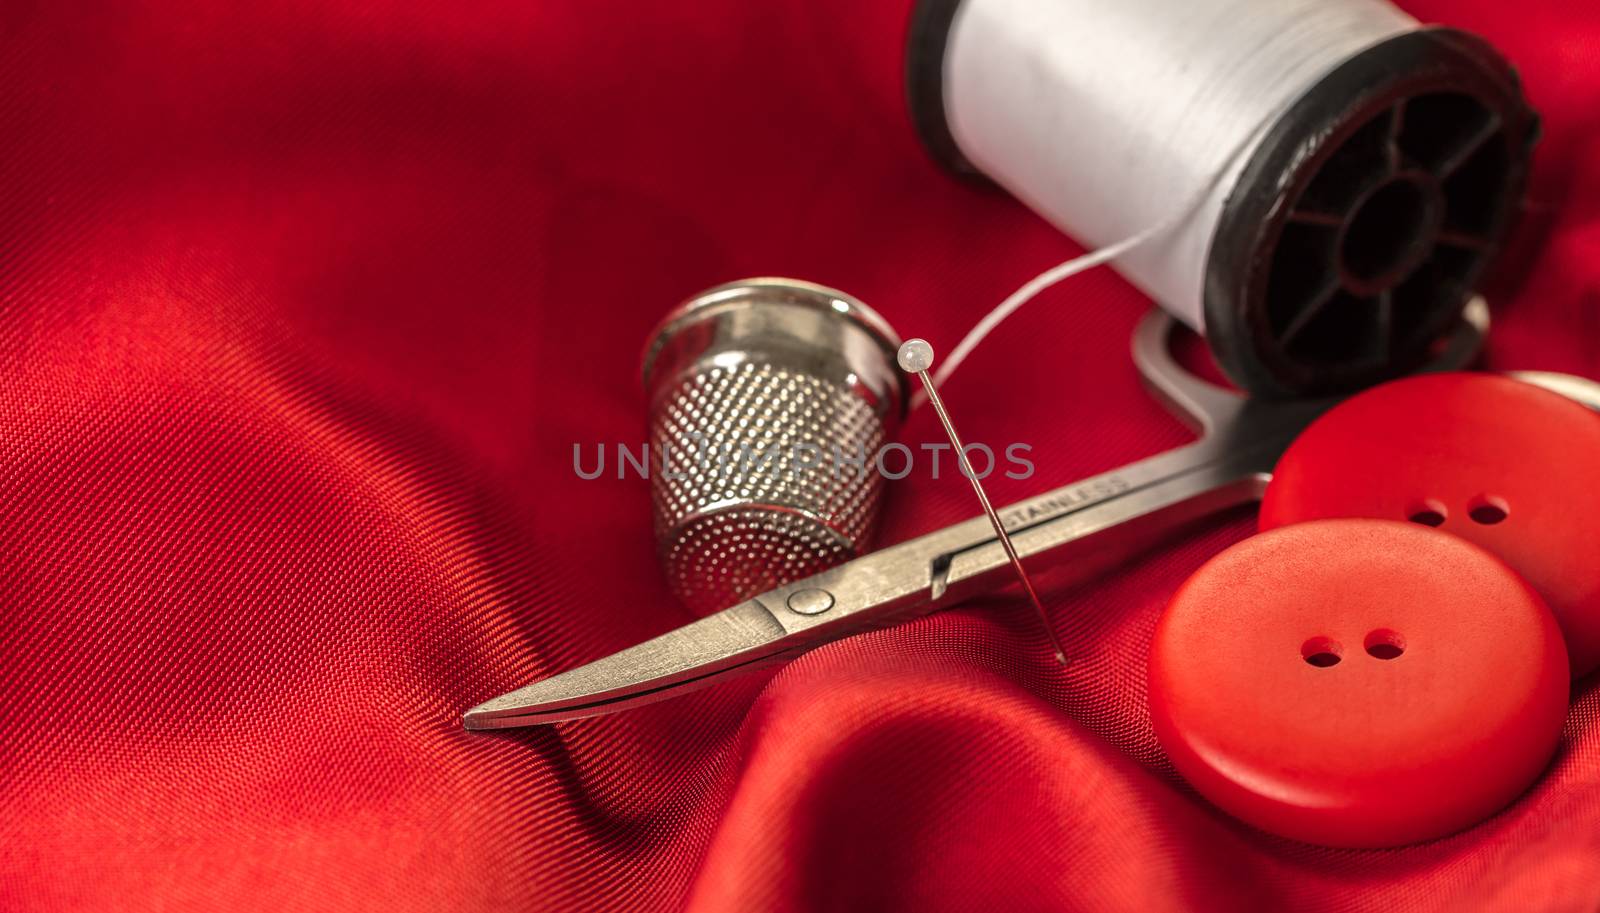 sewing accessories on of red fabric by MegaArt